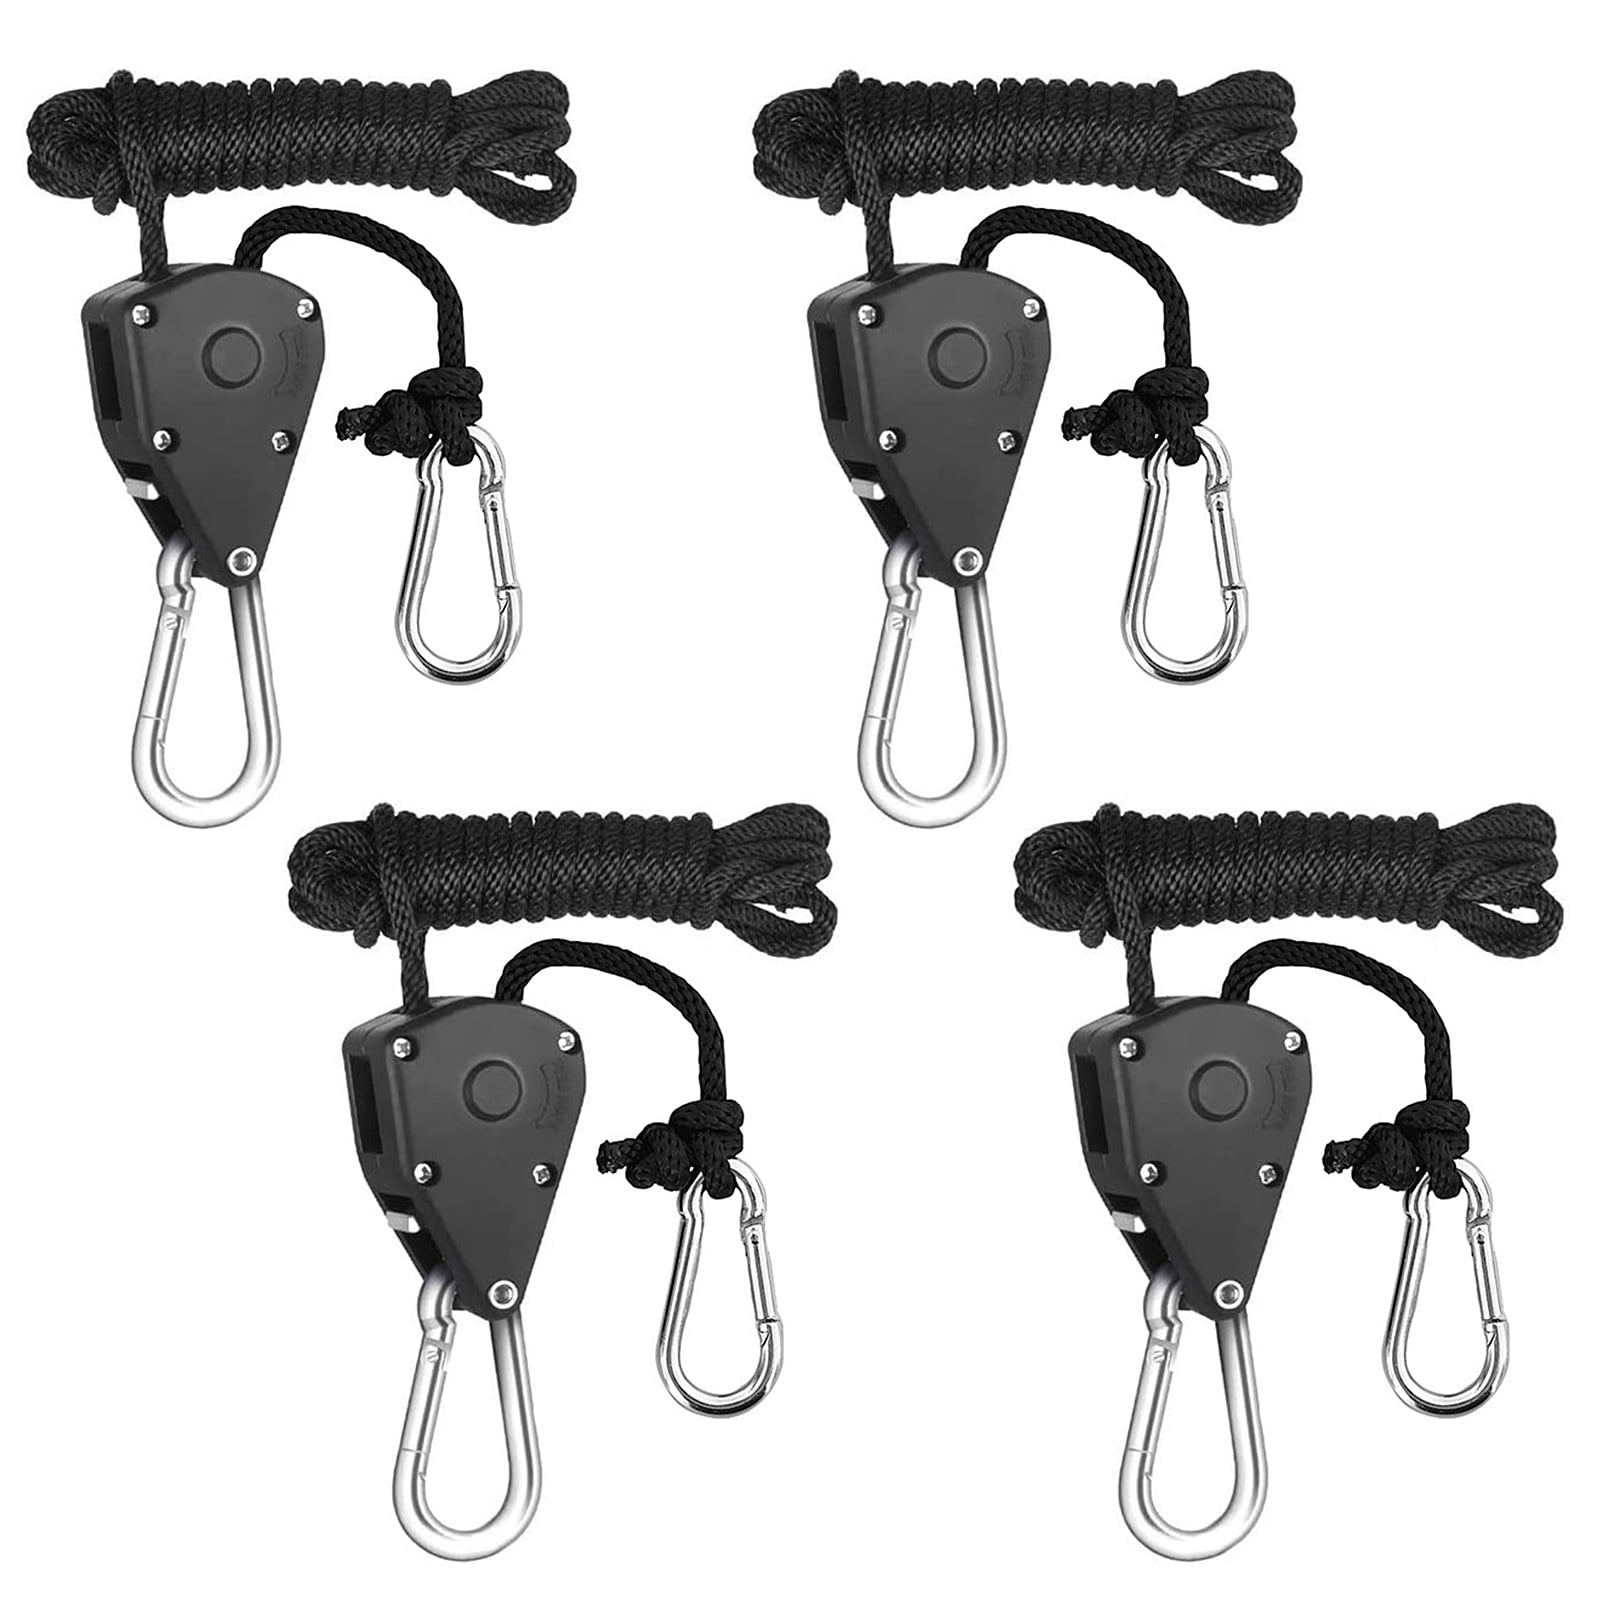 4pcs Pulley Ratchets Heavy Duty Rope Clip Hanger Adjustable